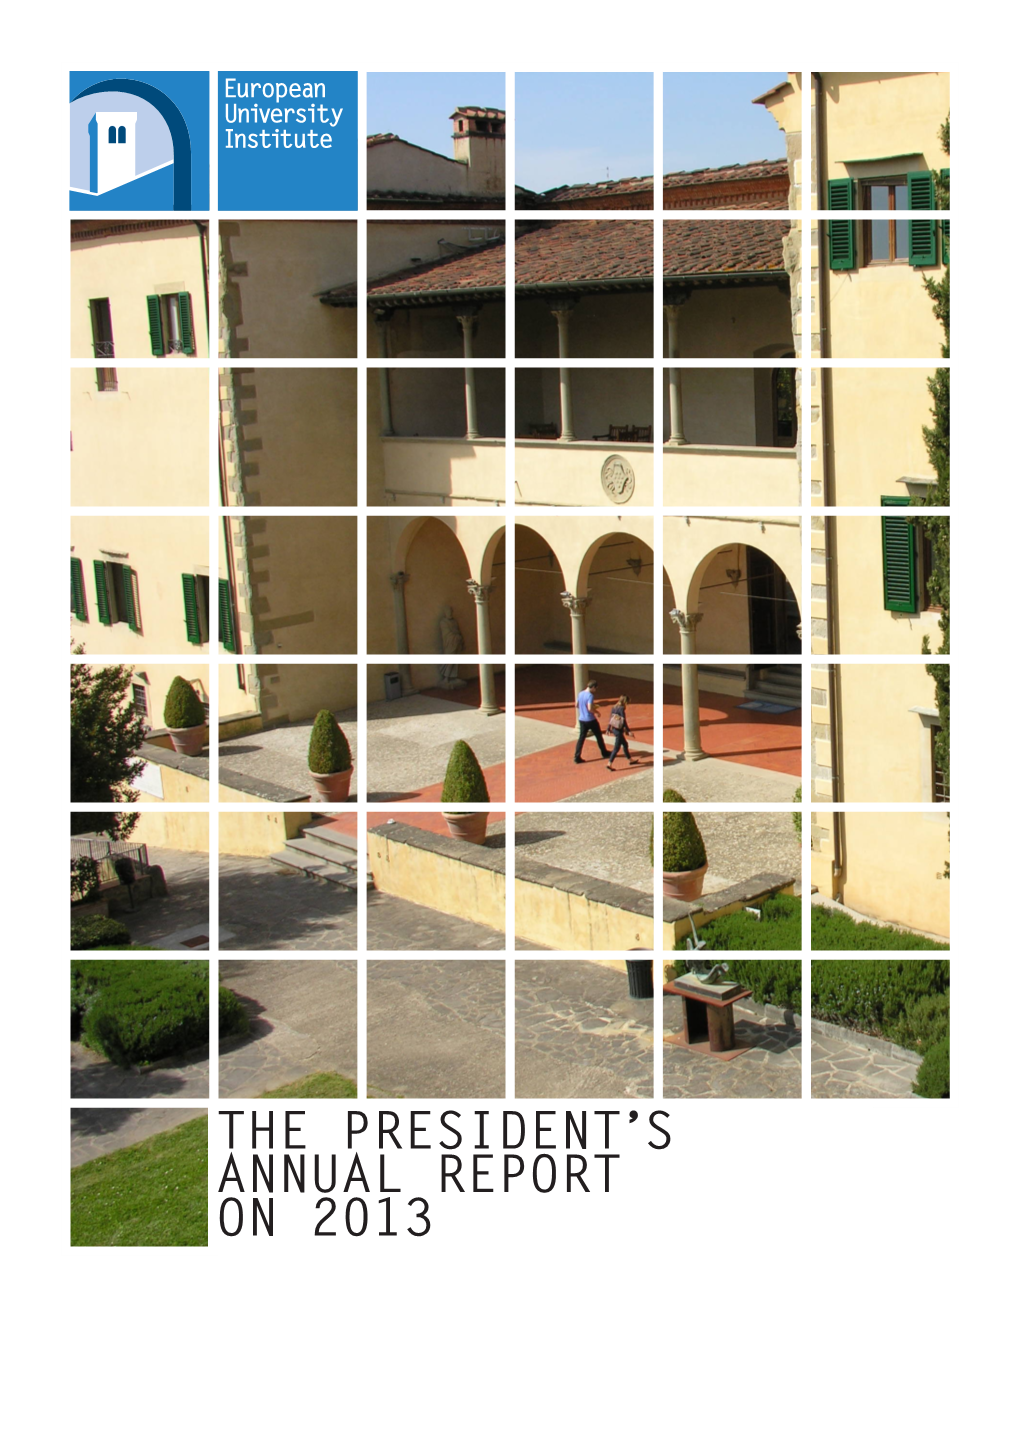 The President's Annual Report on 2013